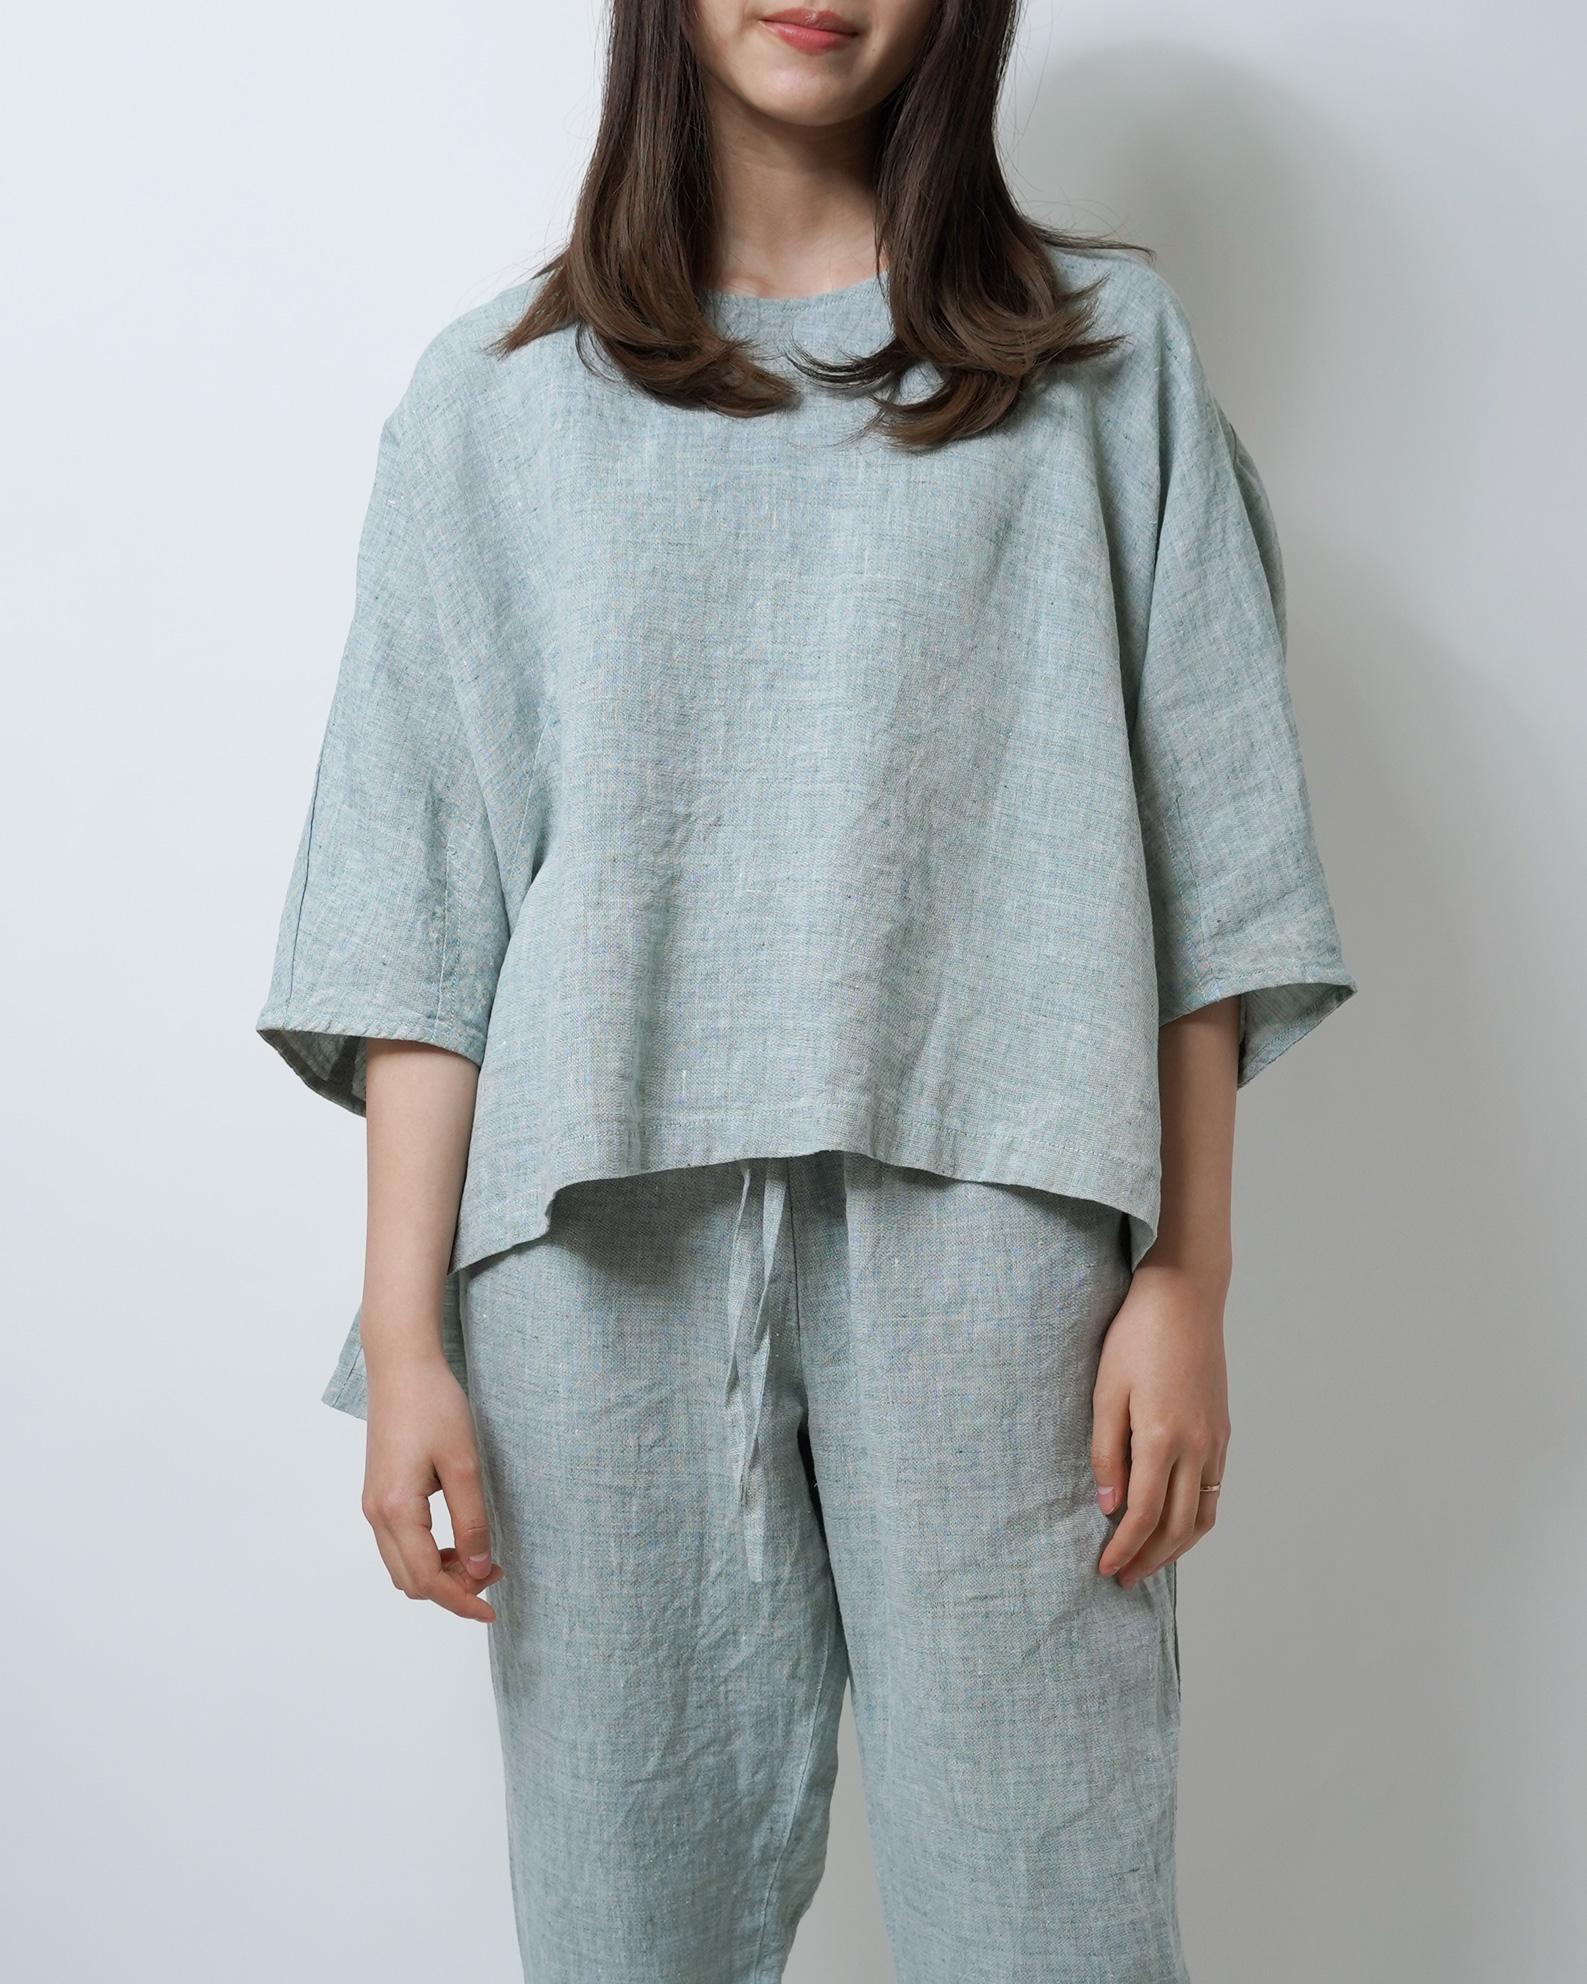 COCOON BLOUSE